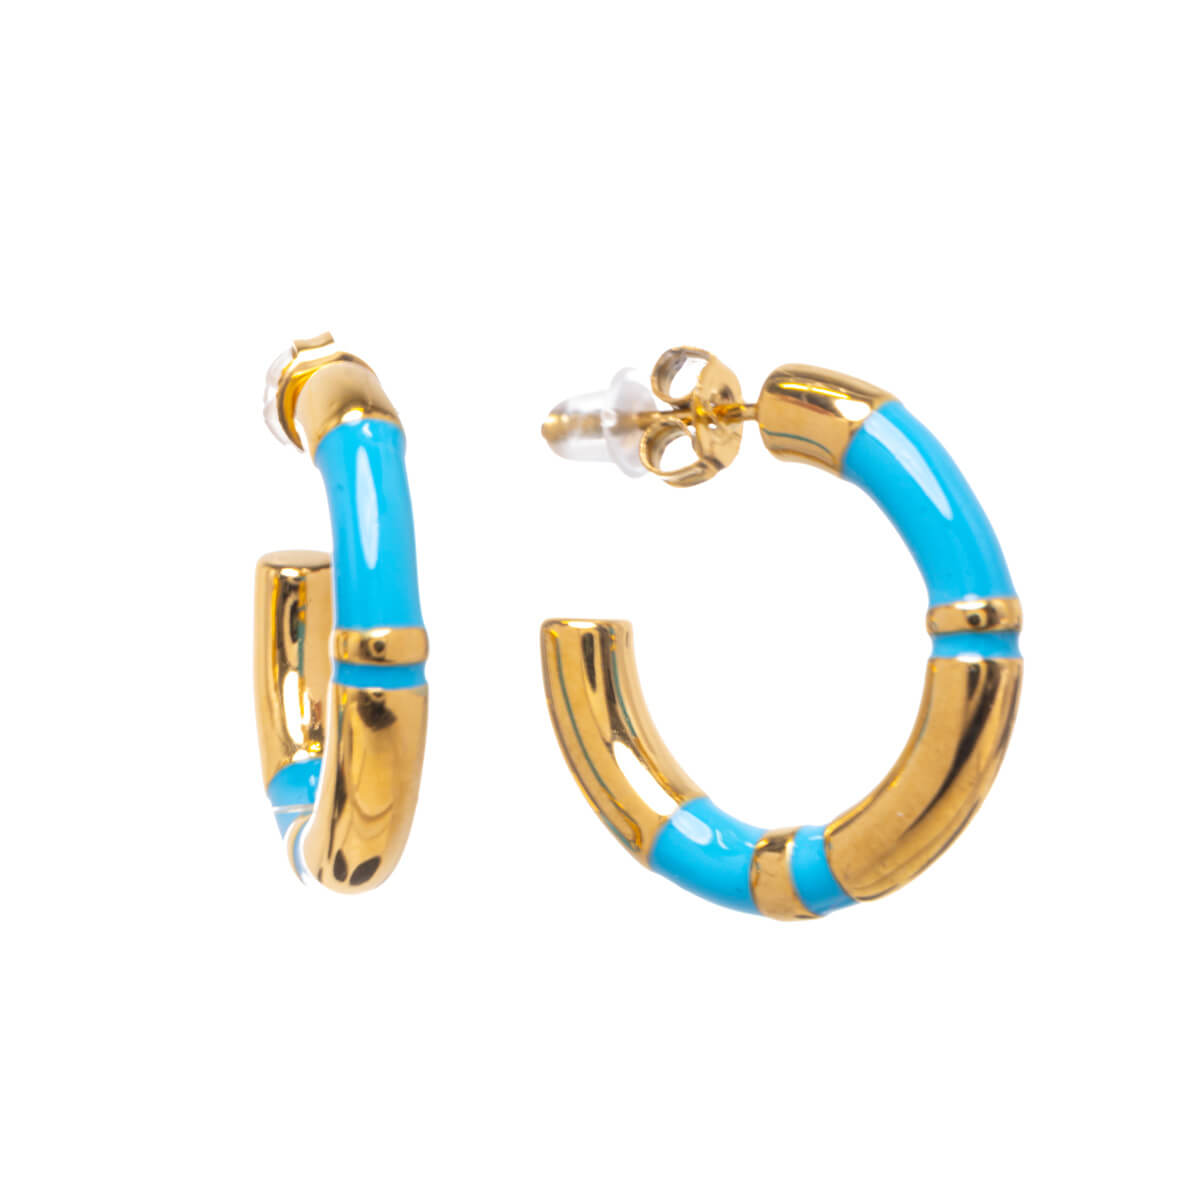 Colourful gold plated steel ring earrings 2,2cm (Steel 316L)